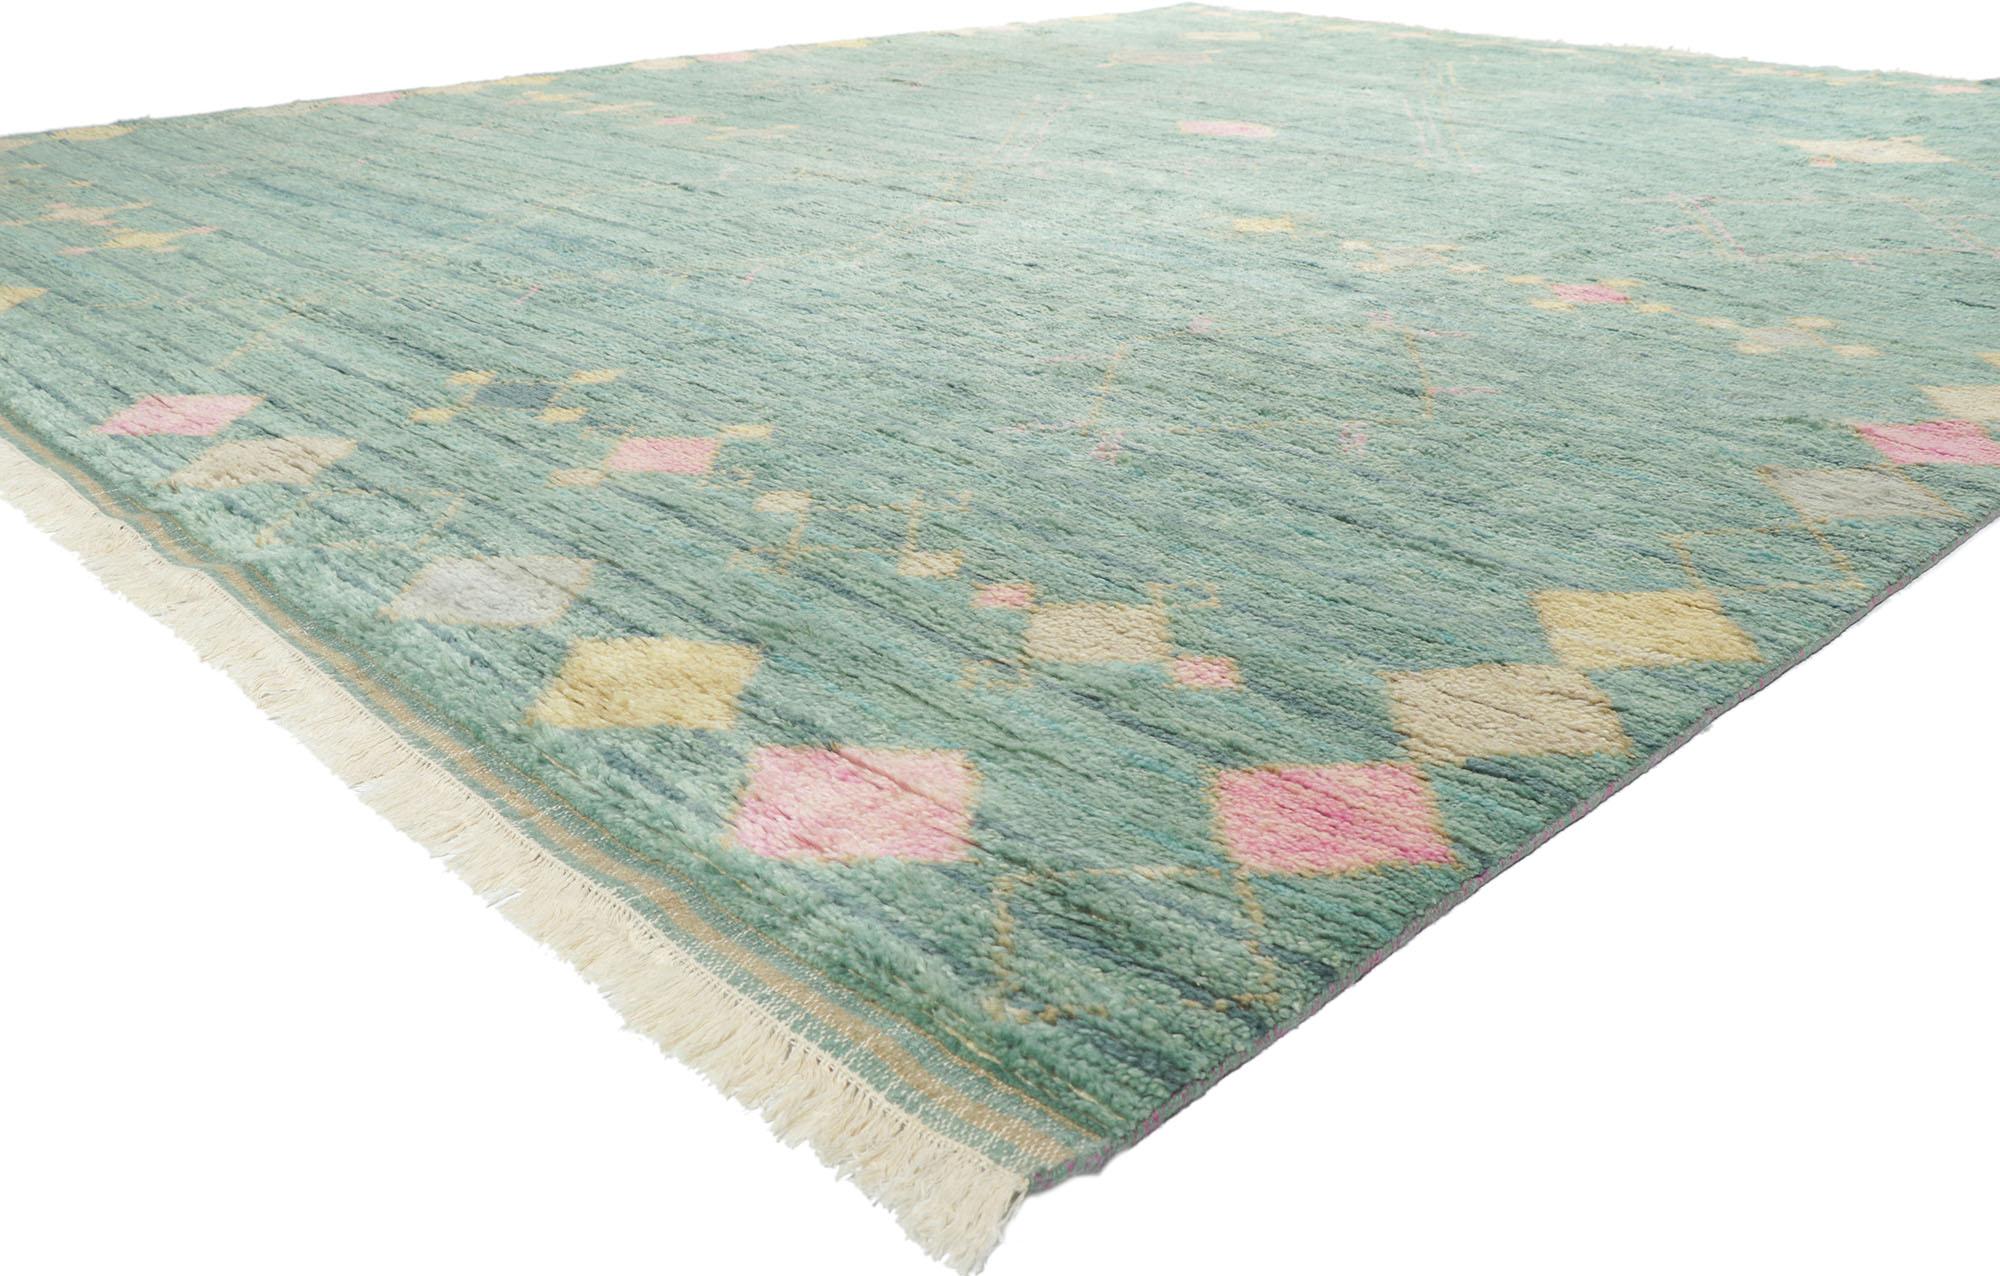 30776 New Contemporary Moroccan Style rug, 12'04 x 14'06.
Abrash.
Hand-knotted wool.
Made in India.
Brand new. In-Stock.